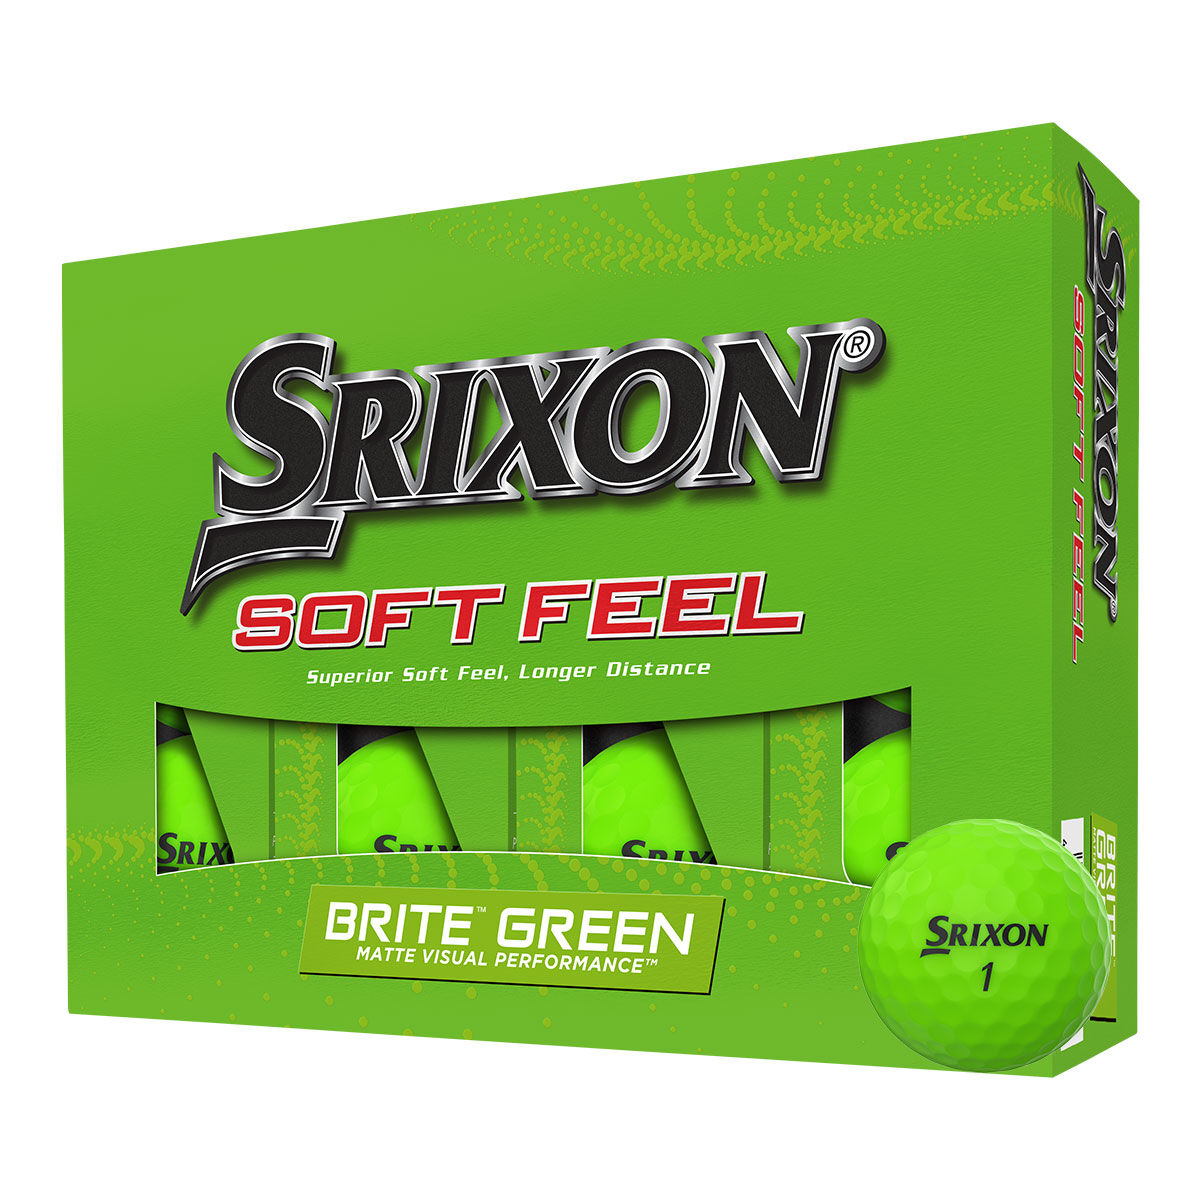 Srixon Green Comfortable Soft Feel Brite 12 Golf Ball Pack | American Golf, One Size - Father's Day Gift von Srixon